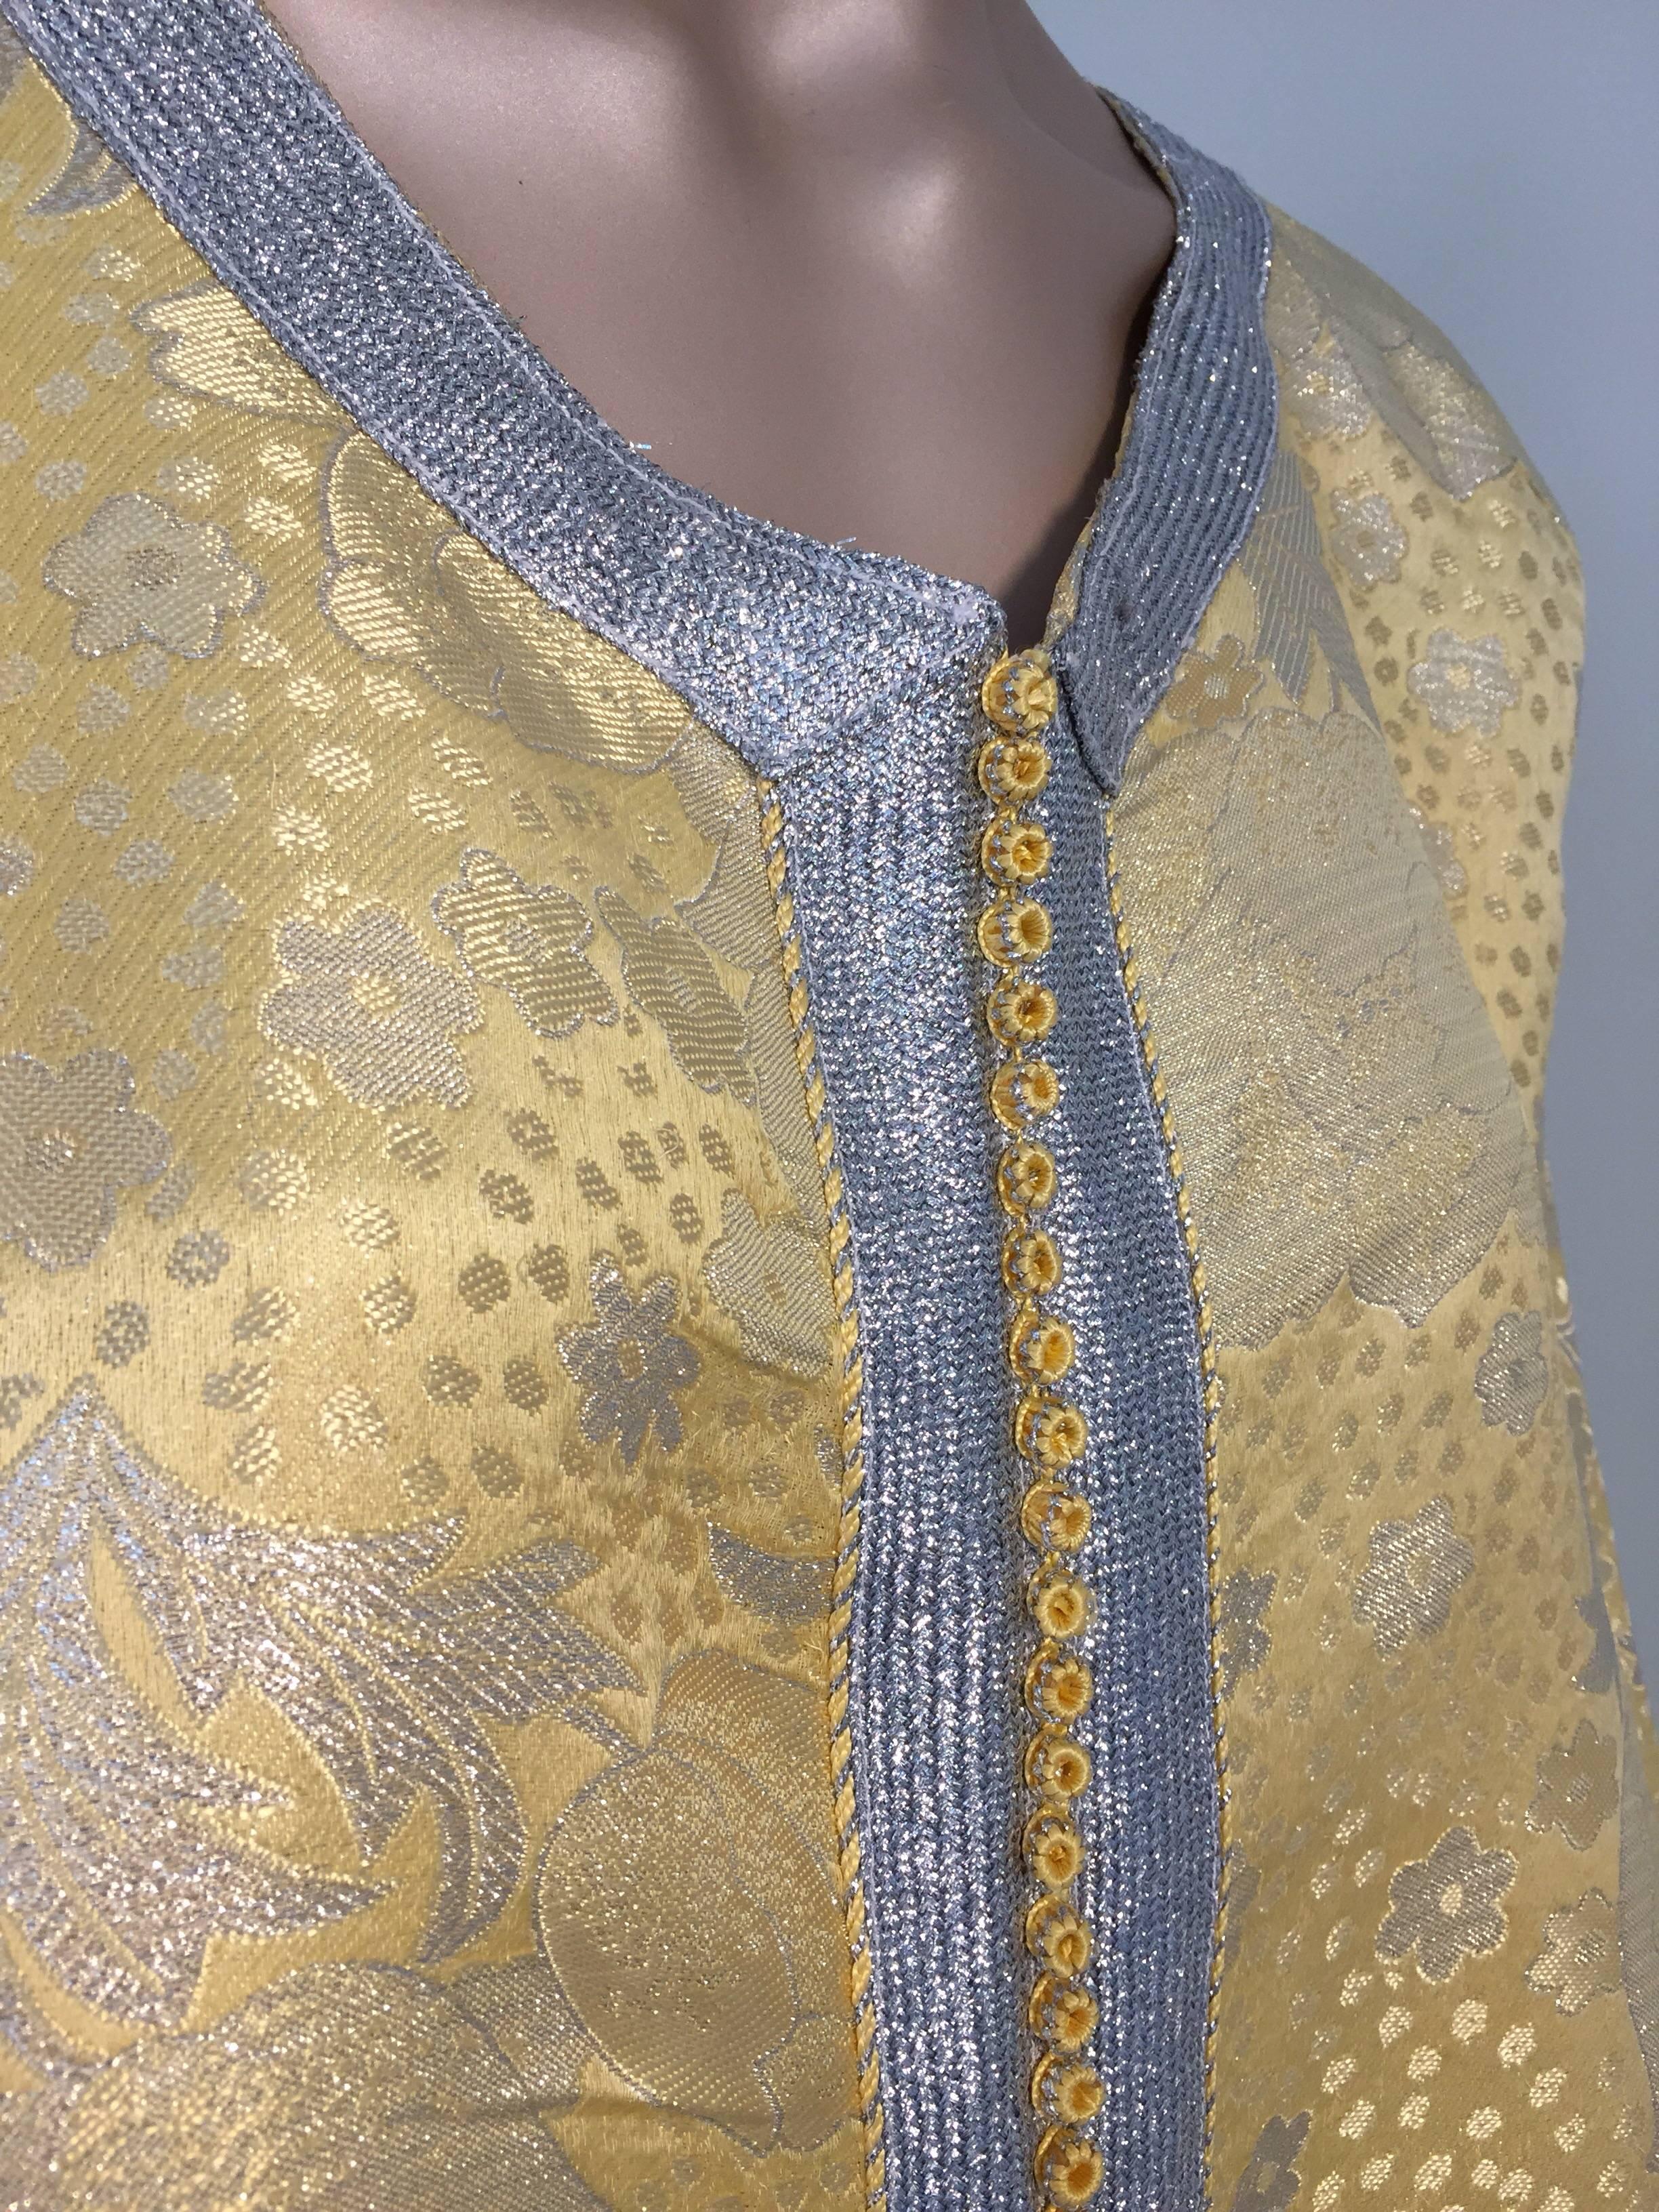 Metallic Gold and Silver Brocade 1970s Maxi Dress Caftan, Evening Gown Kaftan In Excellent Condition For Sale In North Hollywood, CA